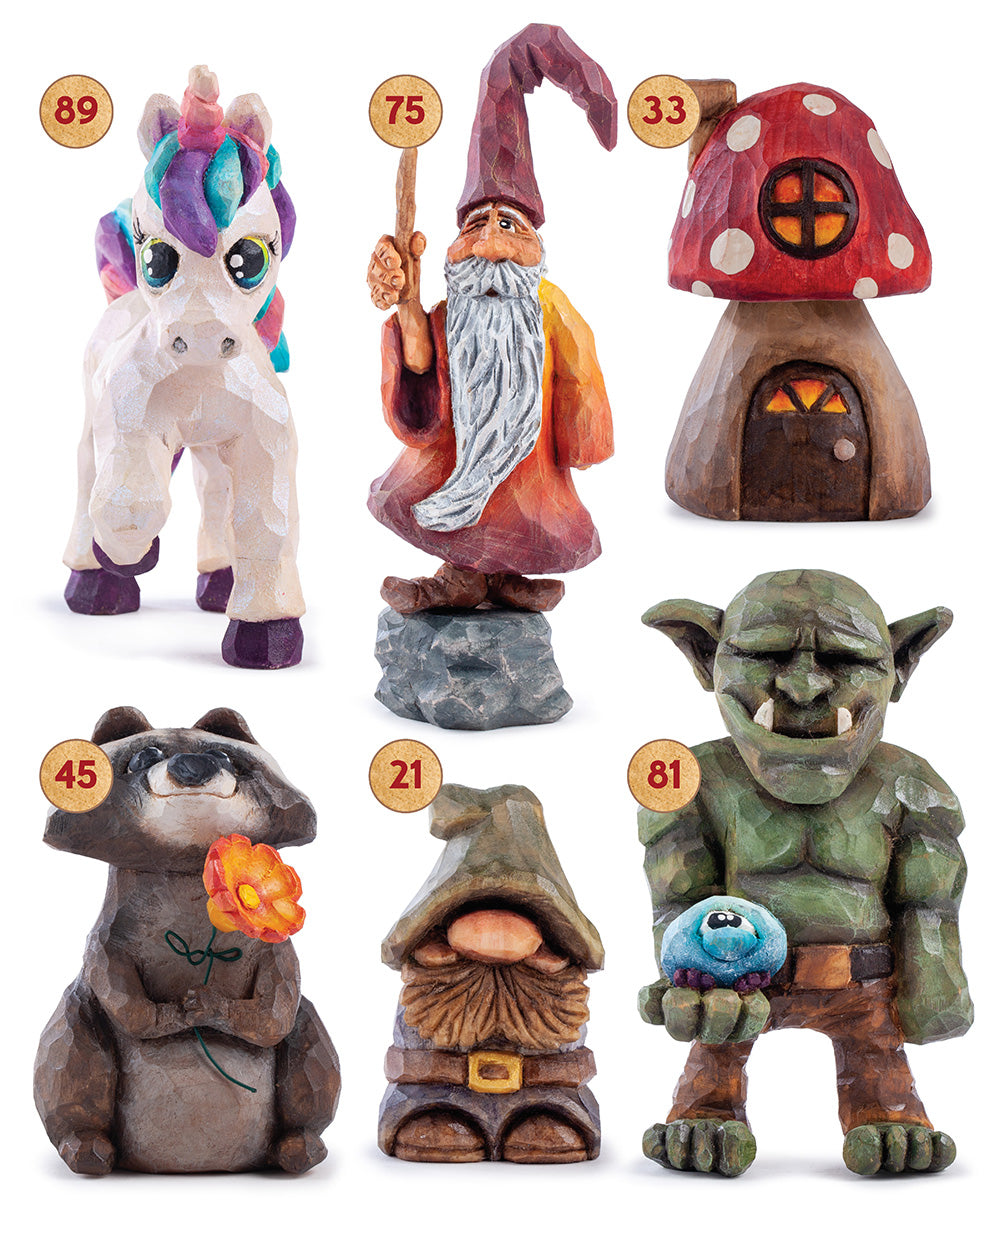 Learn to Carve Gnomes, Trolls, and Mythical Creatures